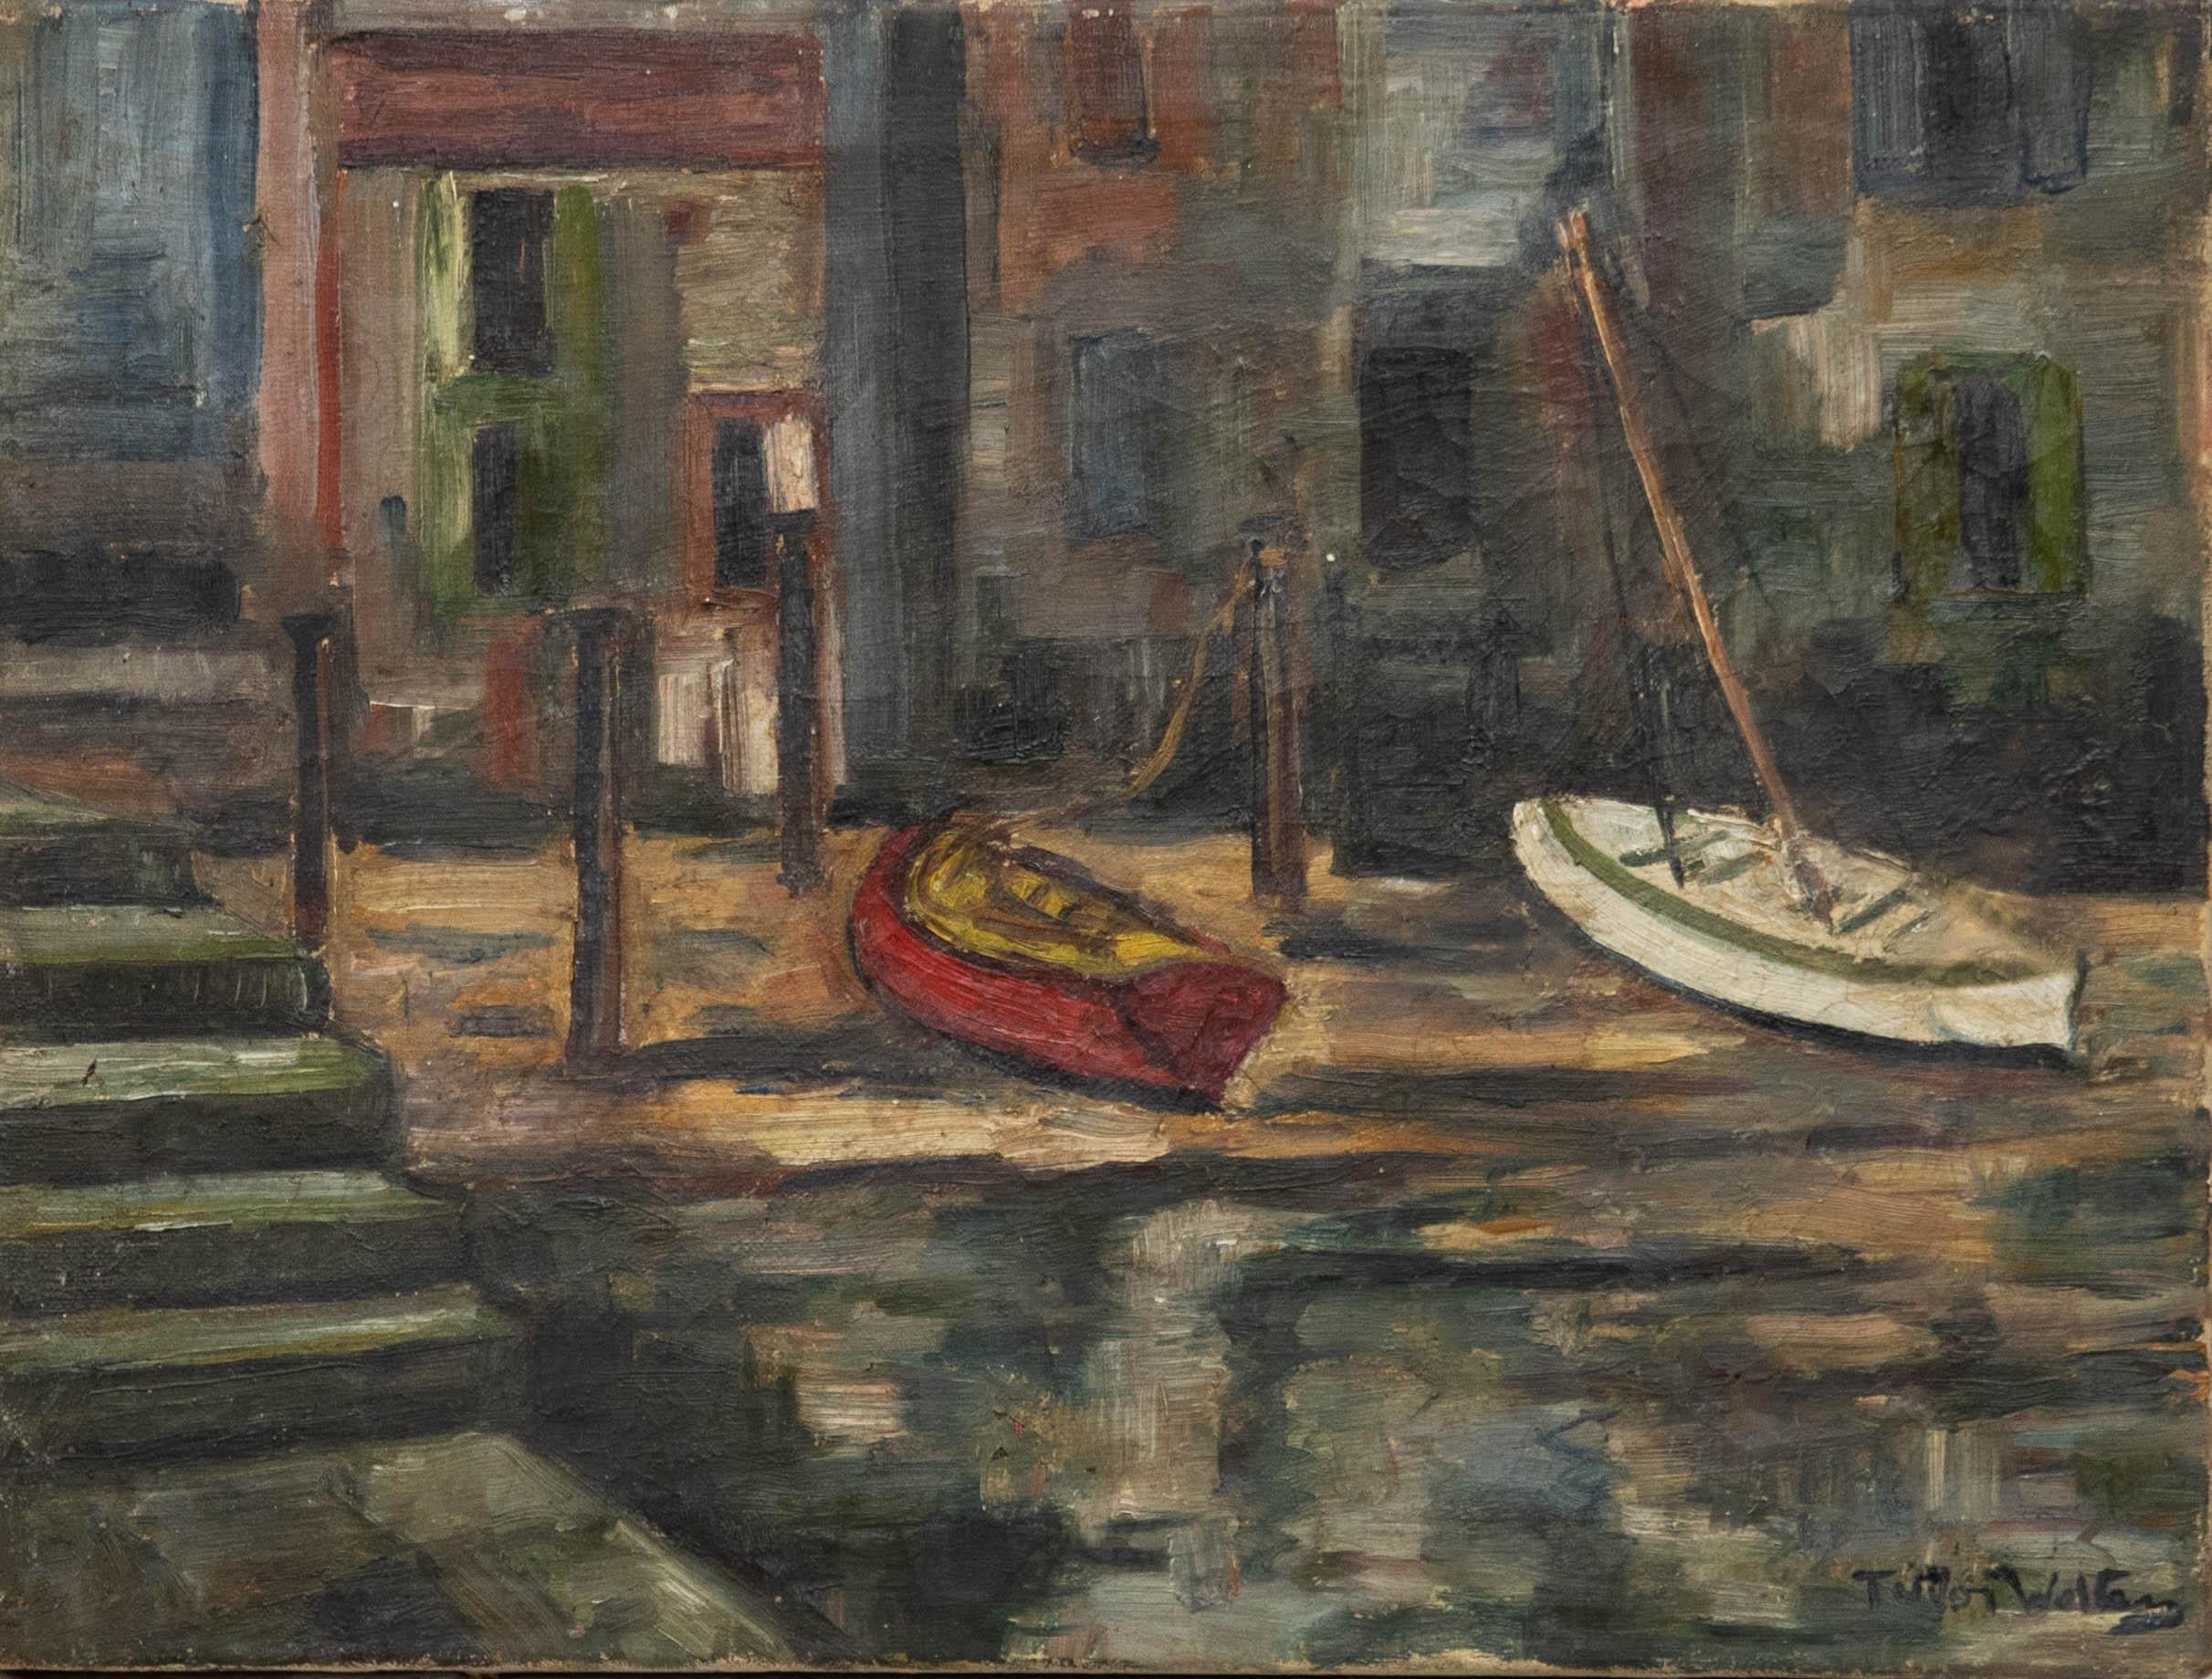 Unknown Figurative Painting - T. Walters - Early 20th Century Oil, Boats by a River